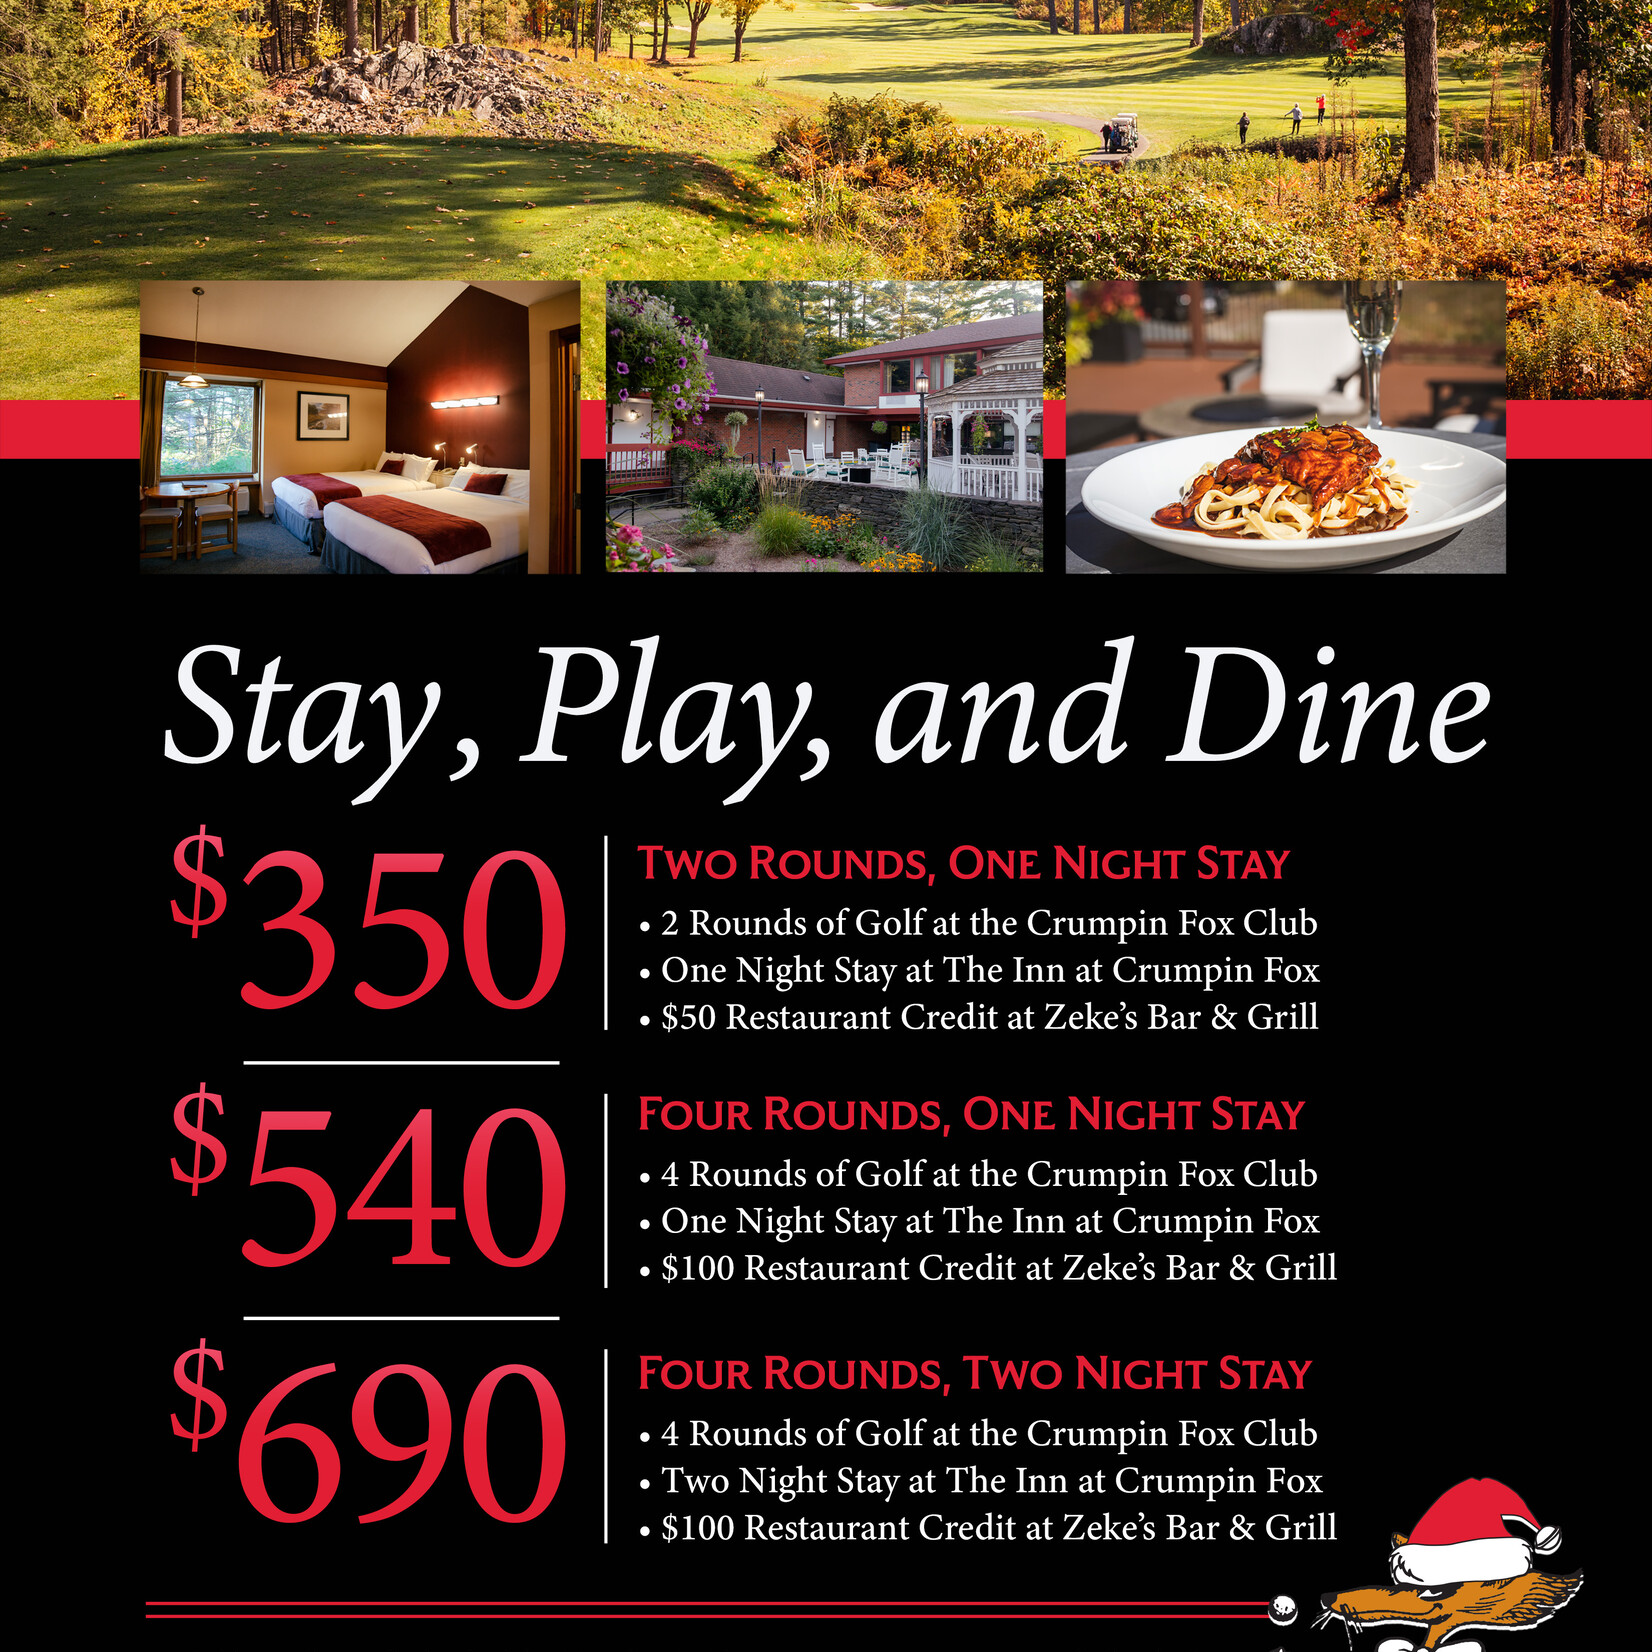 Crumpin Fox Stay, Play & Dine Package - 4 Rounds, 2 Nights Stay & $100 Restaurant Voucher